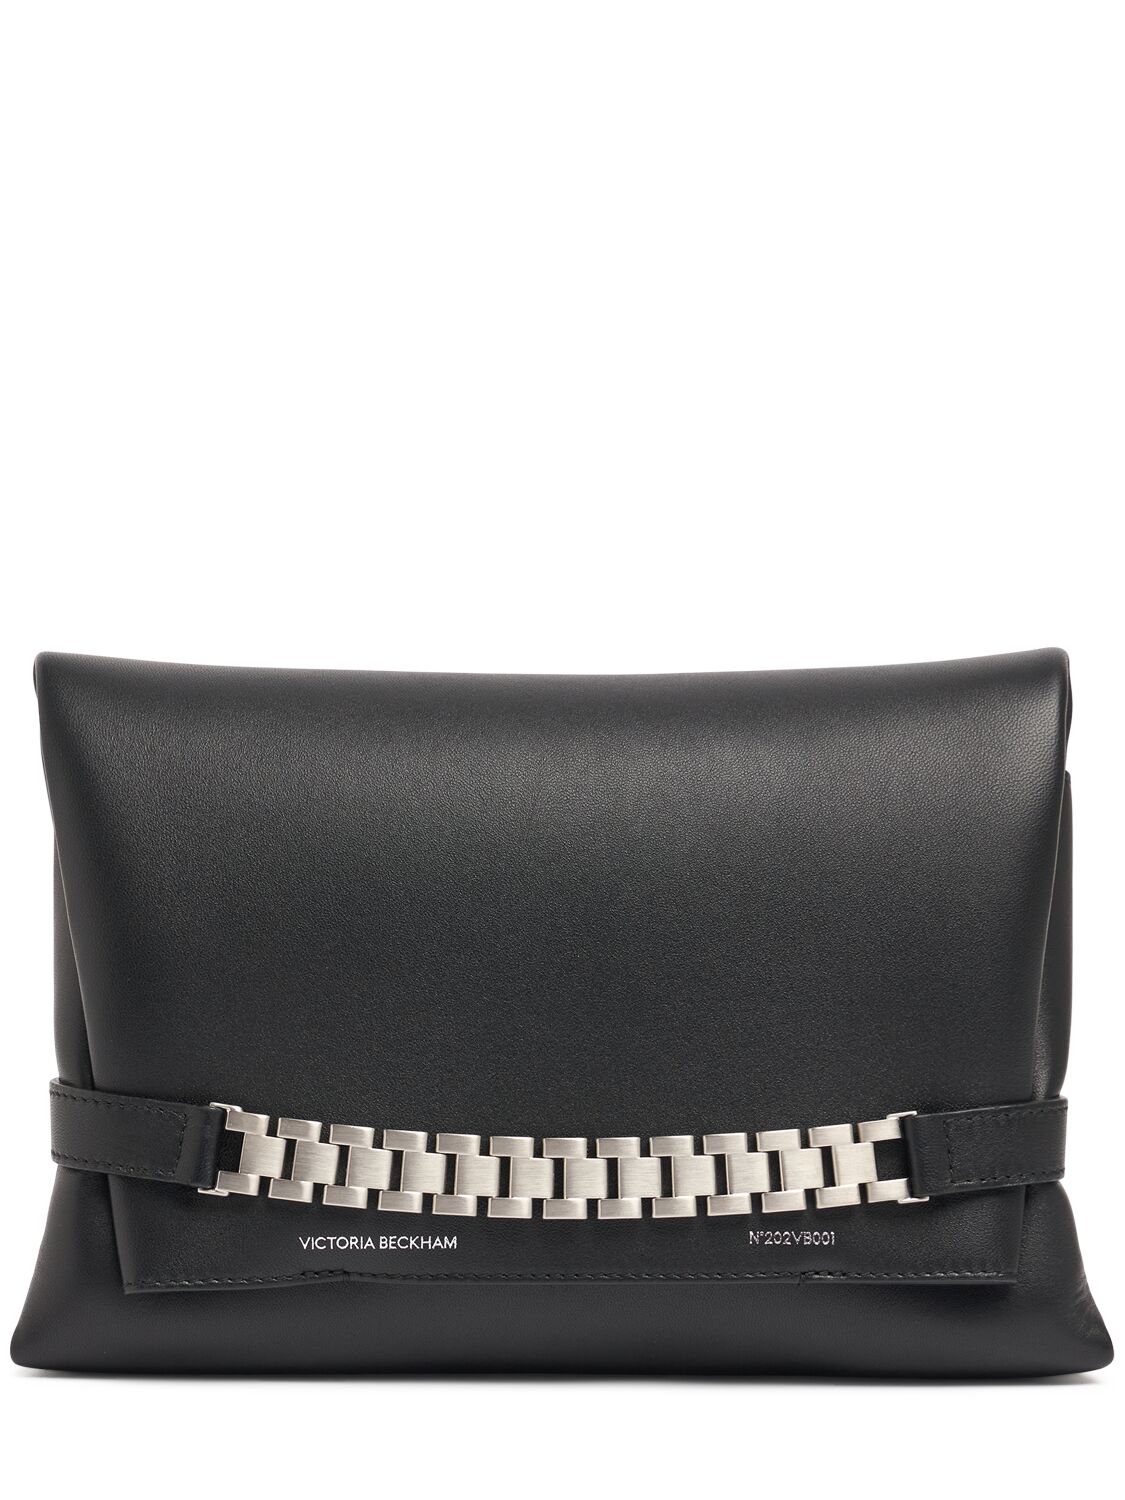 Victoria Beckham Chain Brushed Leather Clutch In Black